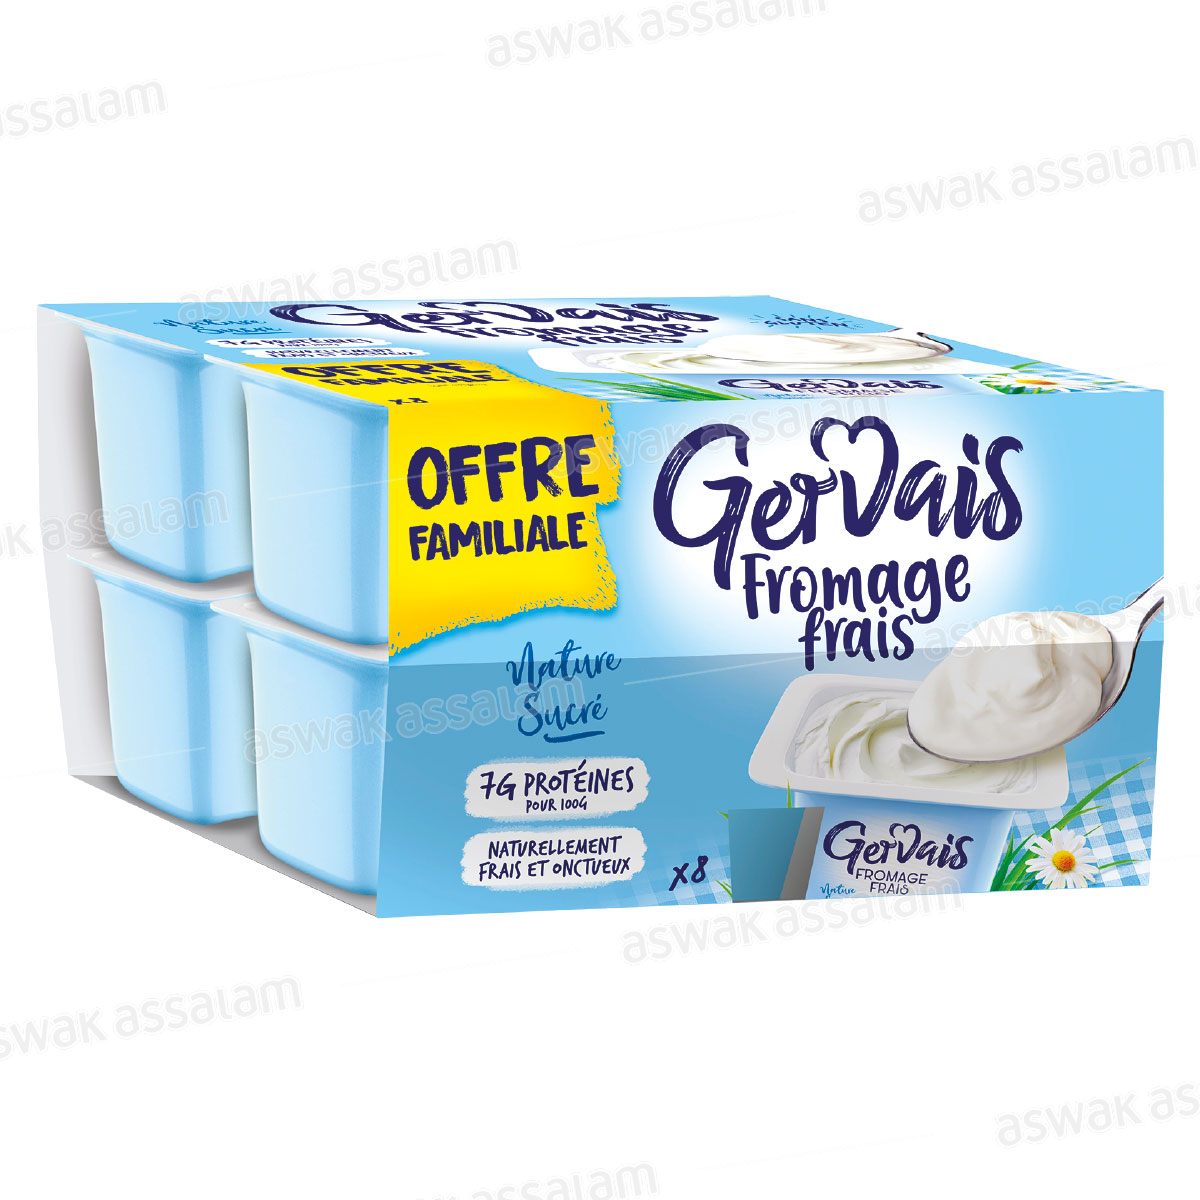 FROMAGE FRAIS NATURE SUCRE 8*80G PACK GERVAIS